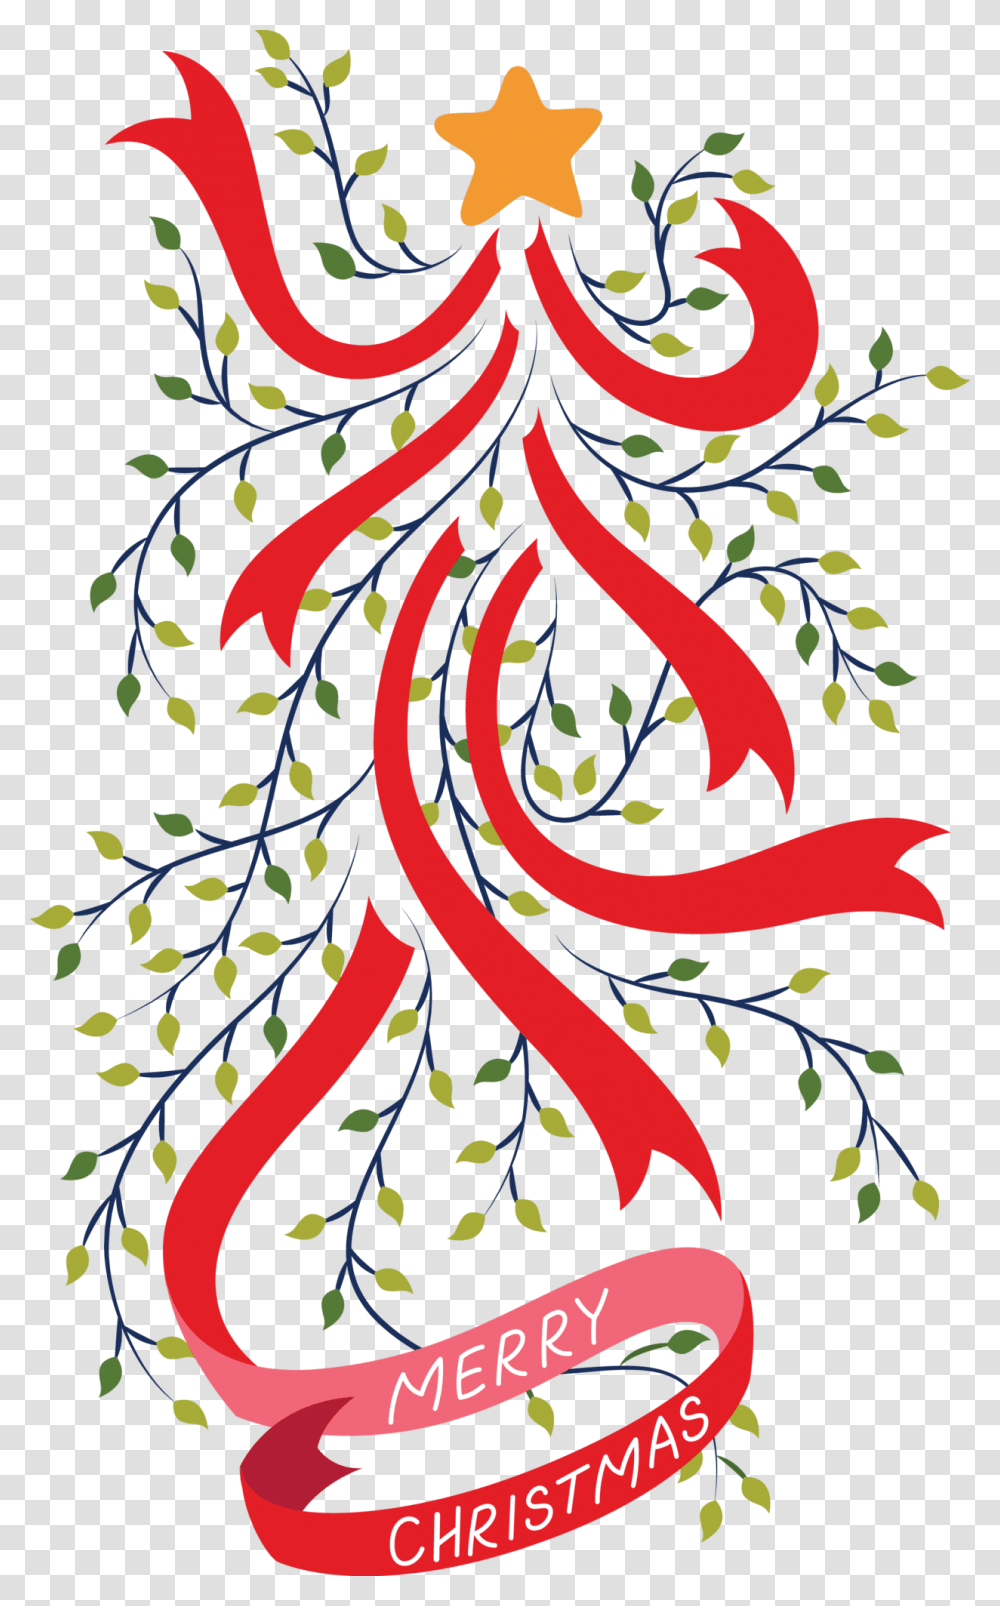 Christmas Tree Fake Tattoo Christmas Tree Temporary Illustration, Pattern, Floral Design Transparent Png